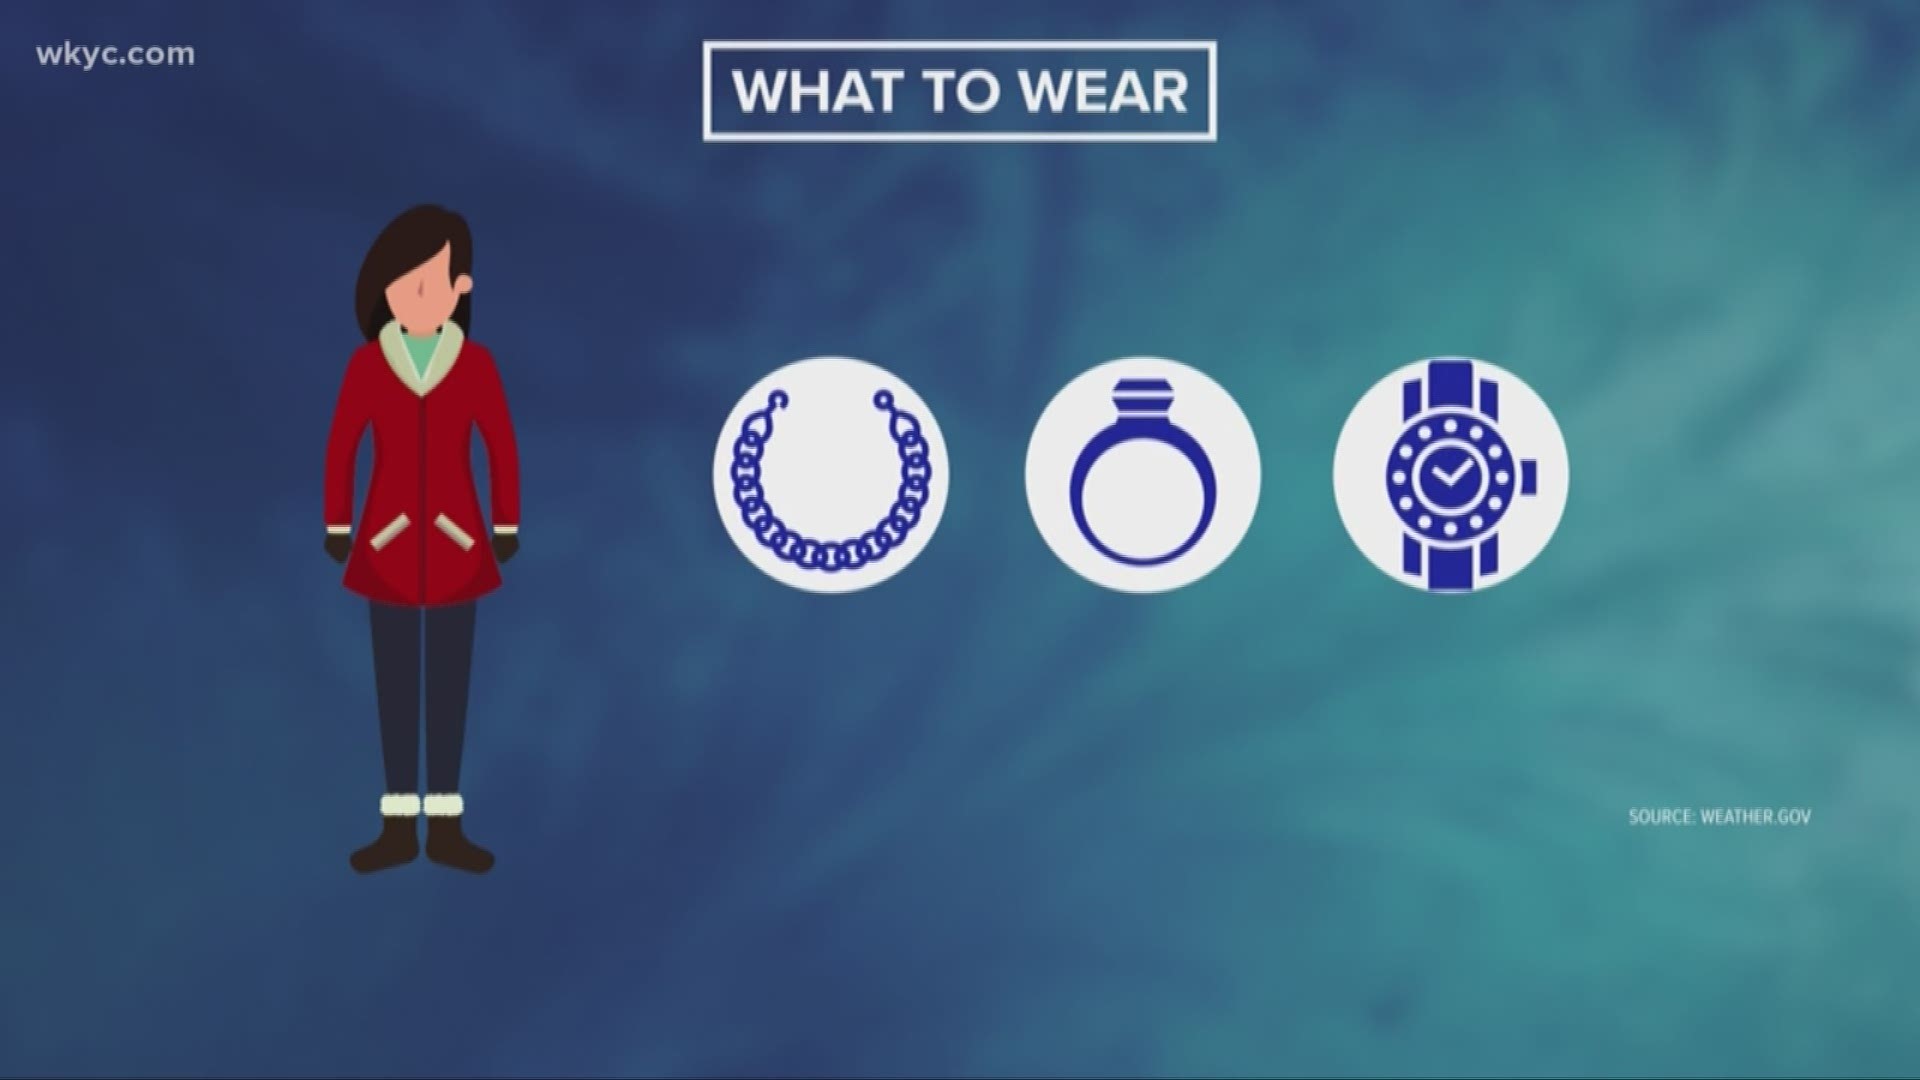 Jan. 30, 2019: It's so cold outside that it could be life-threatening. WKYC's Jasmine Monroe explains all the extra precautions you should be taking.